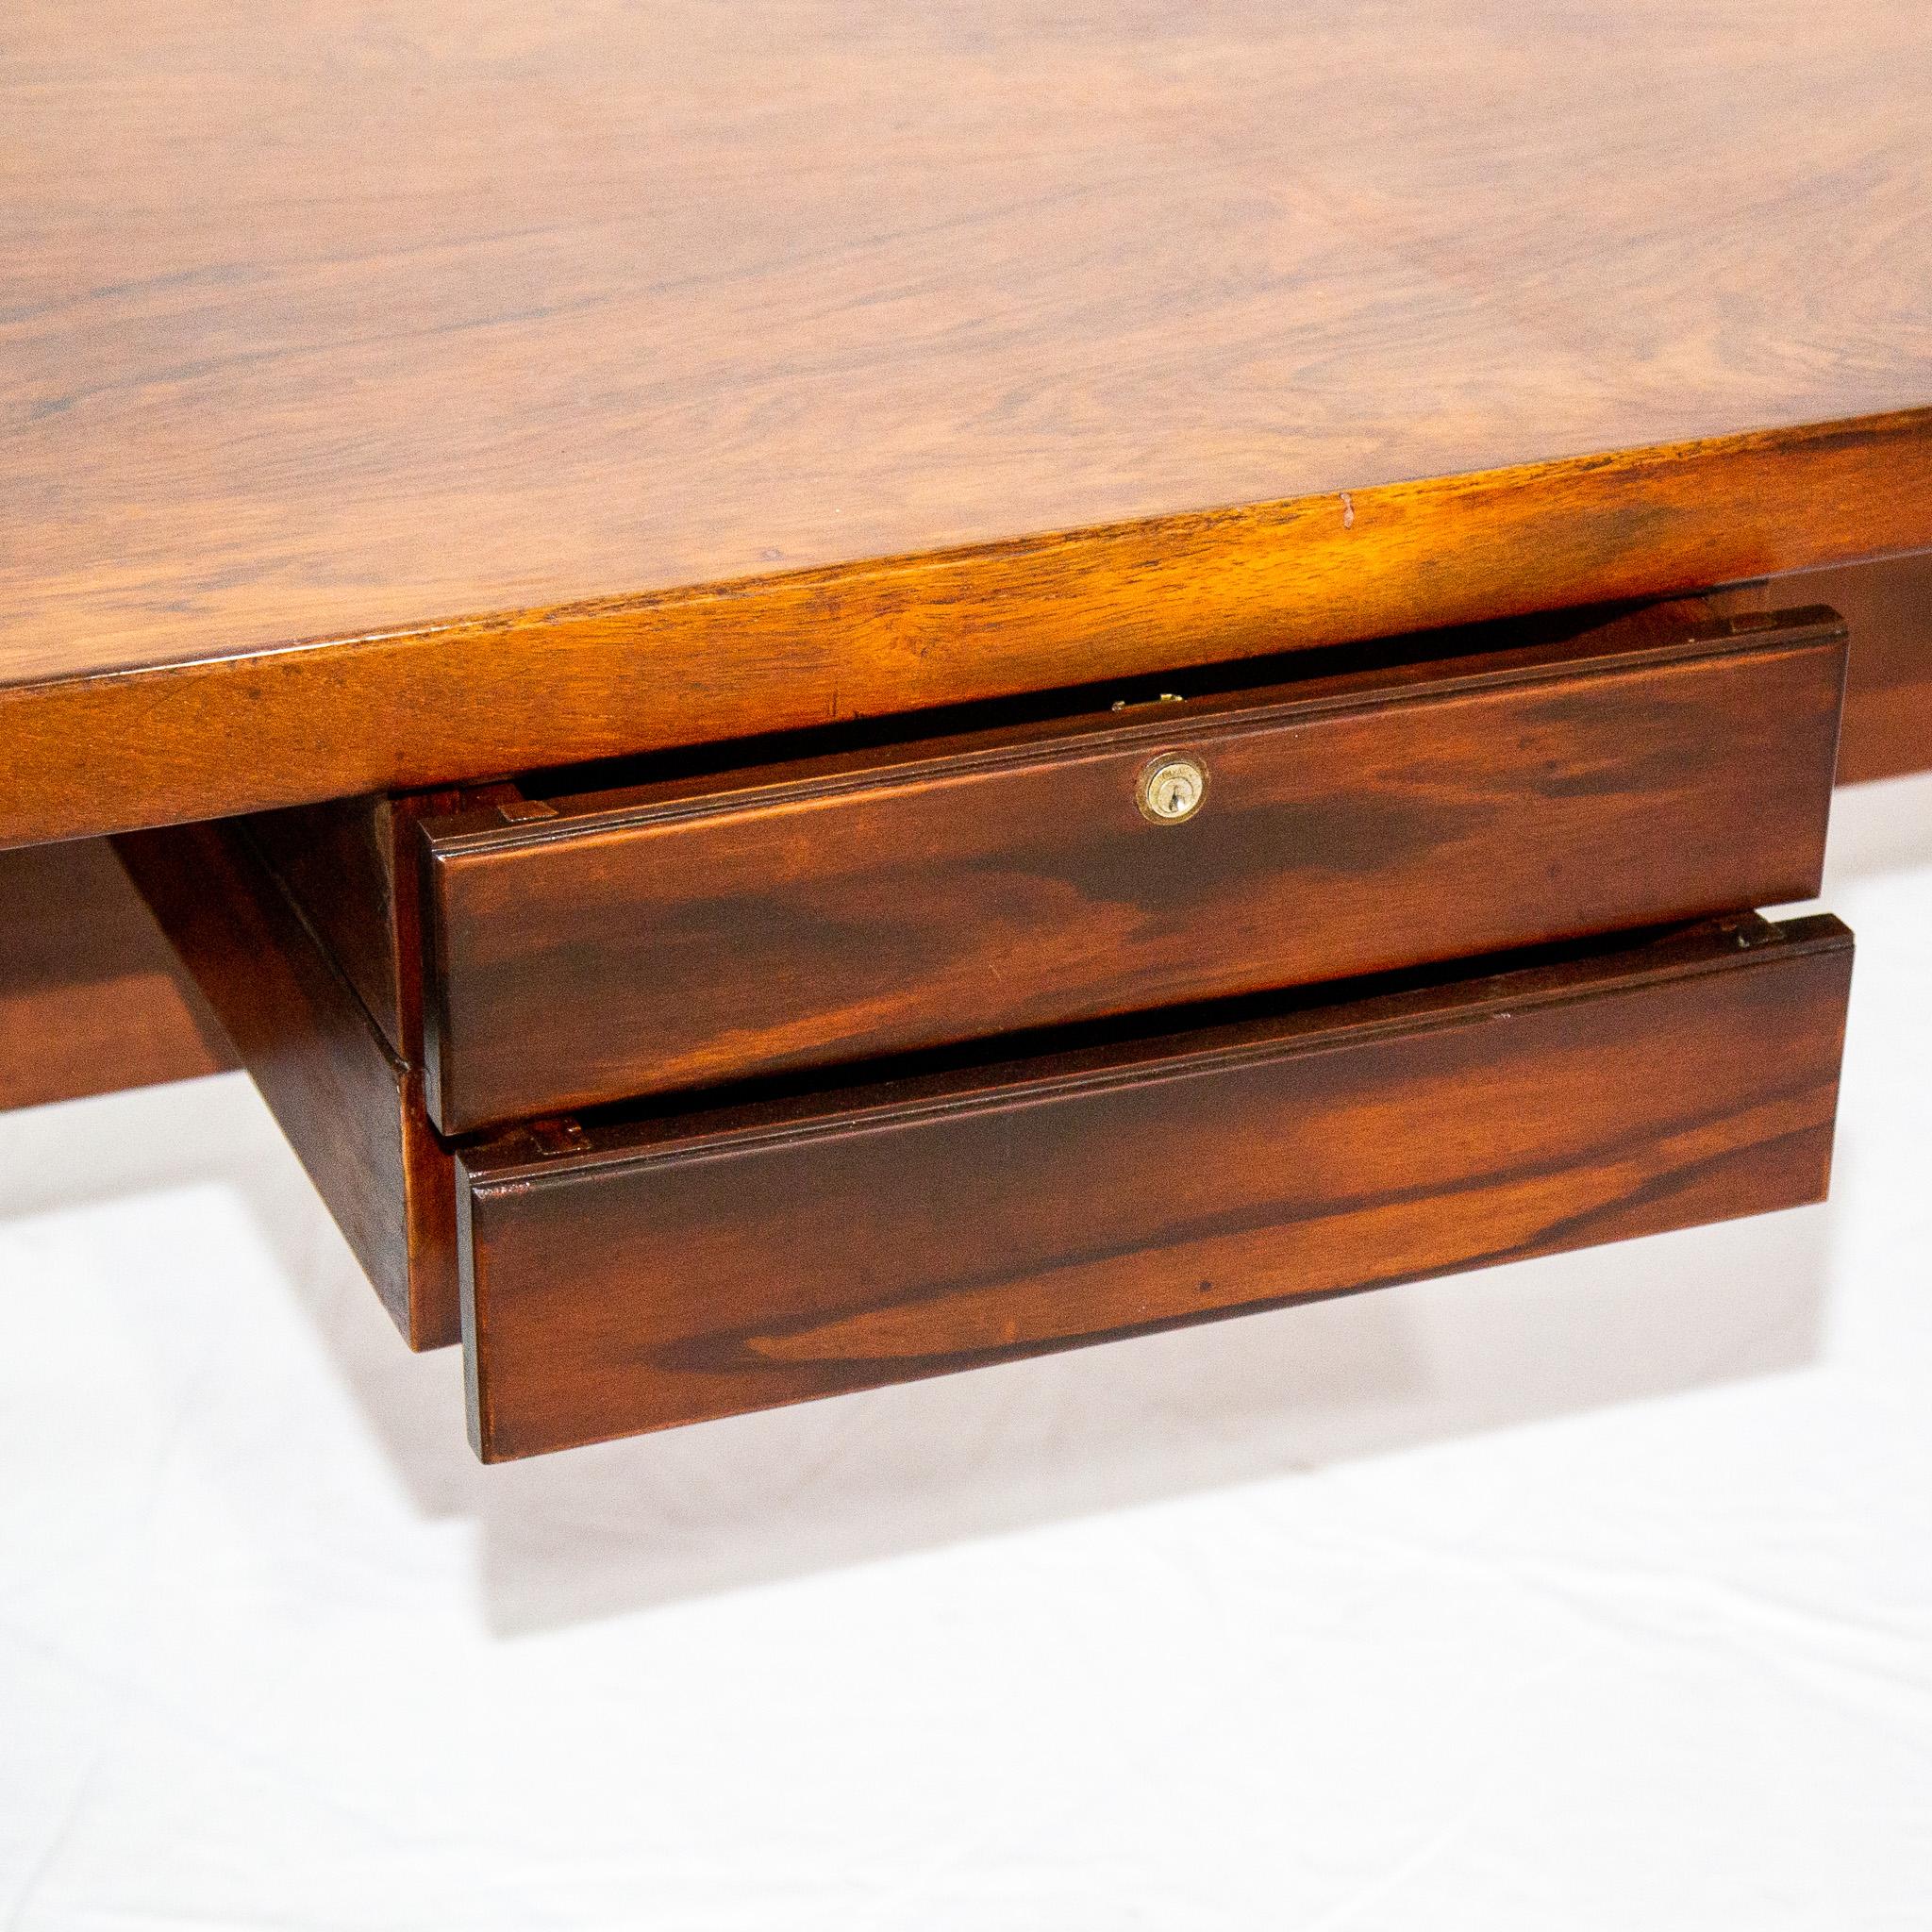 Brazilian Modern Desk in Hardwood with Floating Drawers, Sergio Rodrigues, 1960s For Sale 6